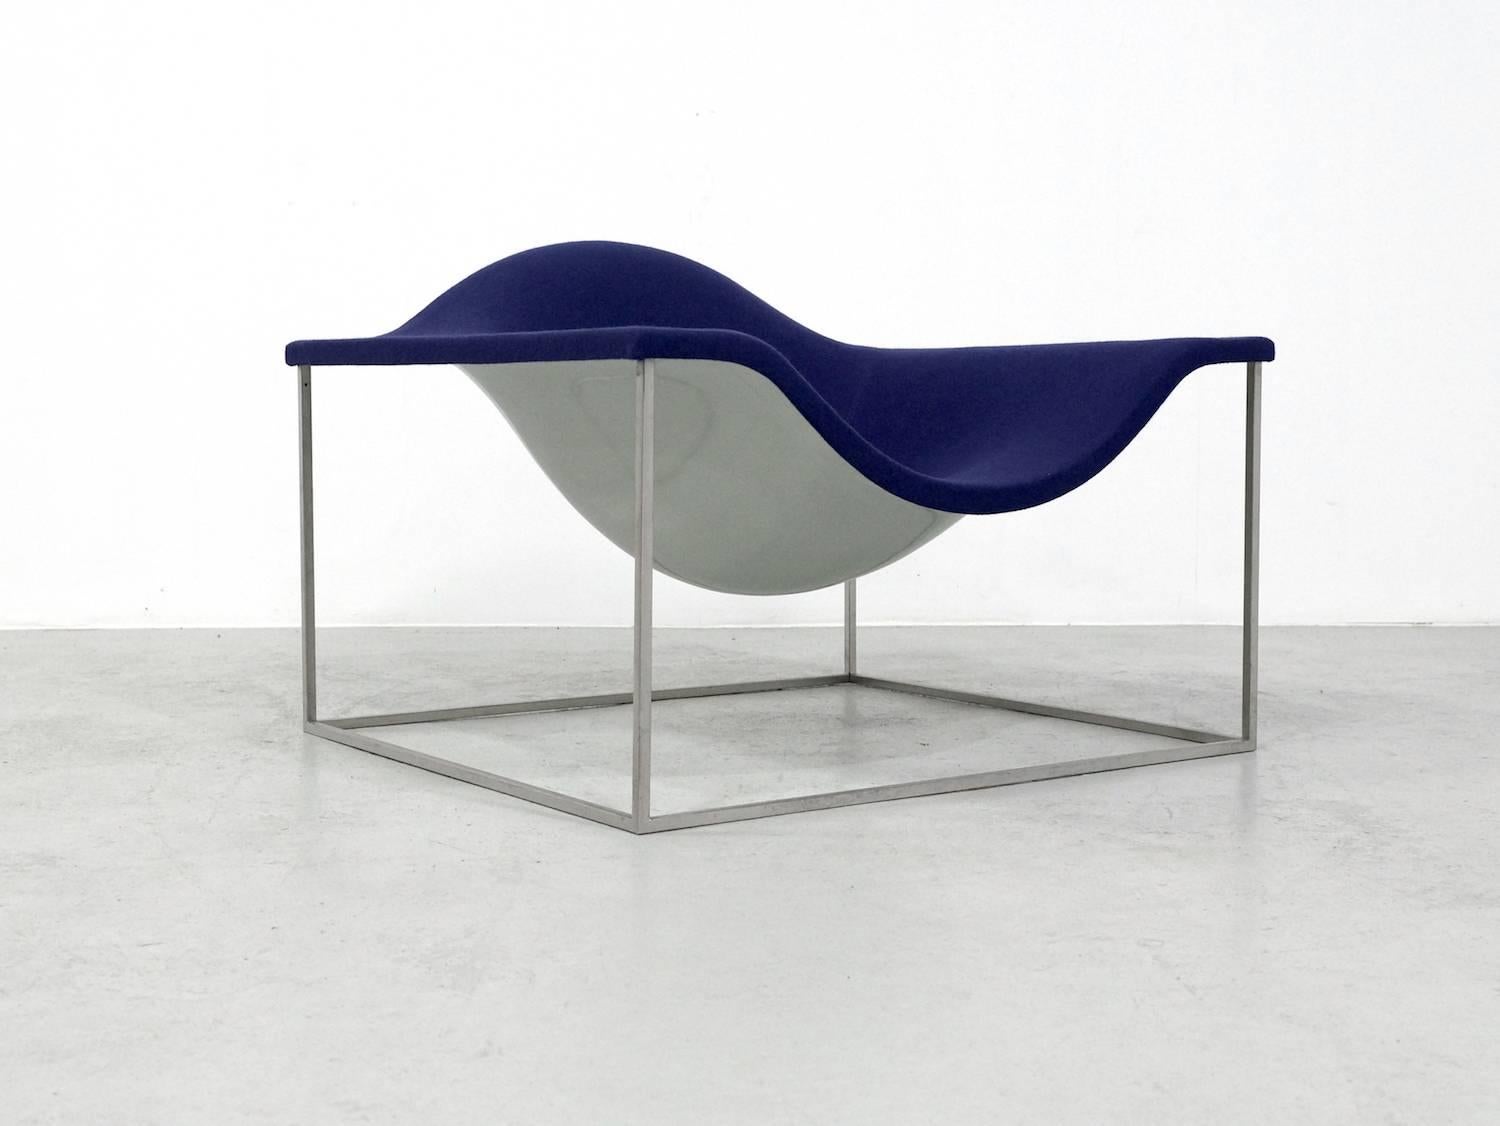 This is a masterpiece in Minimalist designed in 2002 for Cappellini, this piece went more for Space Age minimalism. It is a Minimalistic and out-of-the-box thinking that Jean-Marie Massaud’s designed this super minimalistic armchair with polished